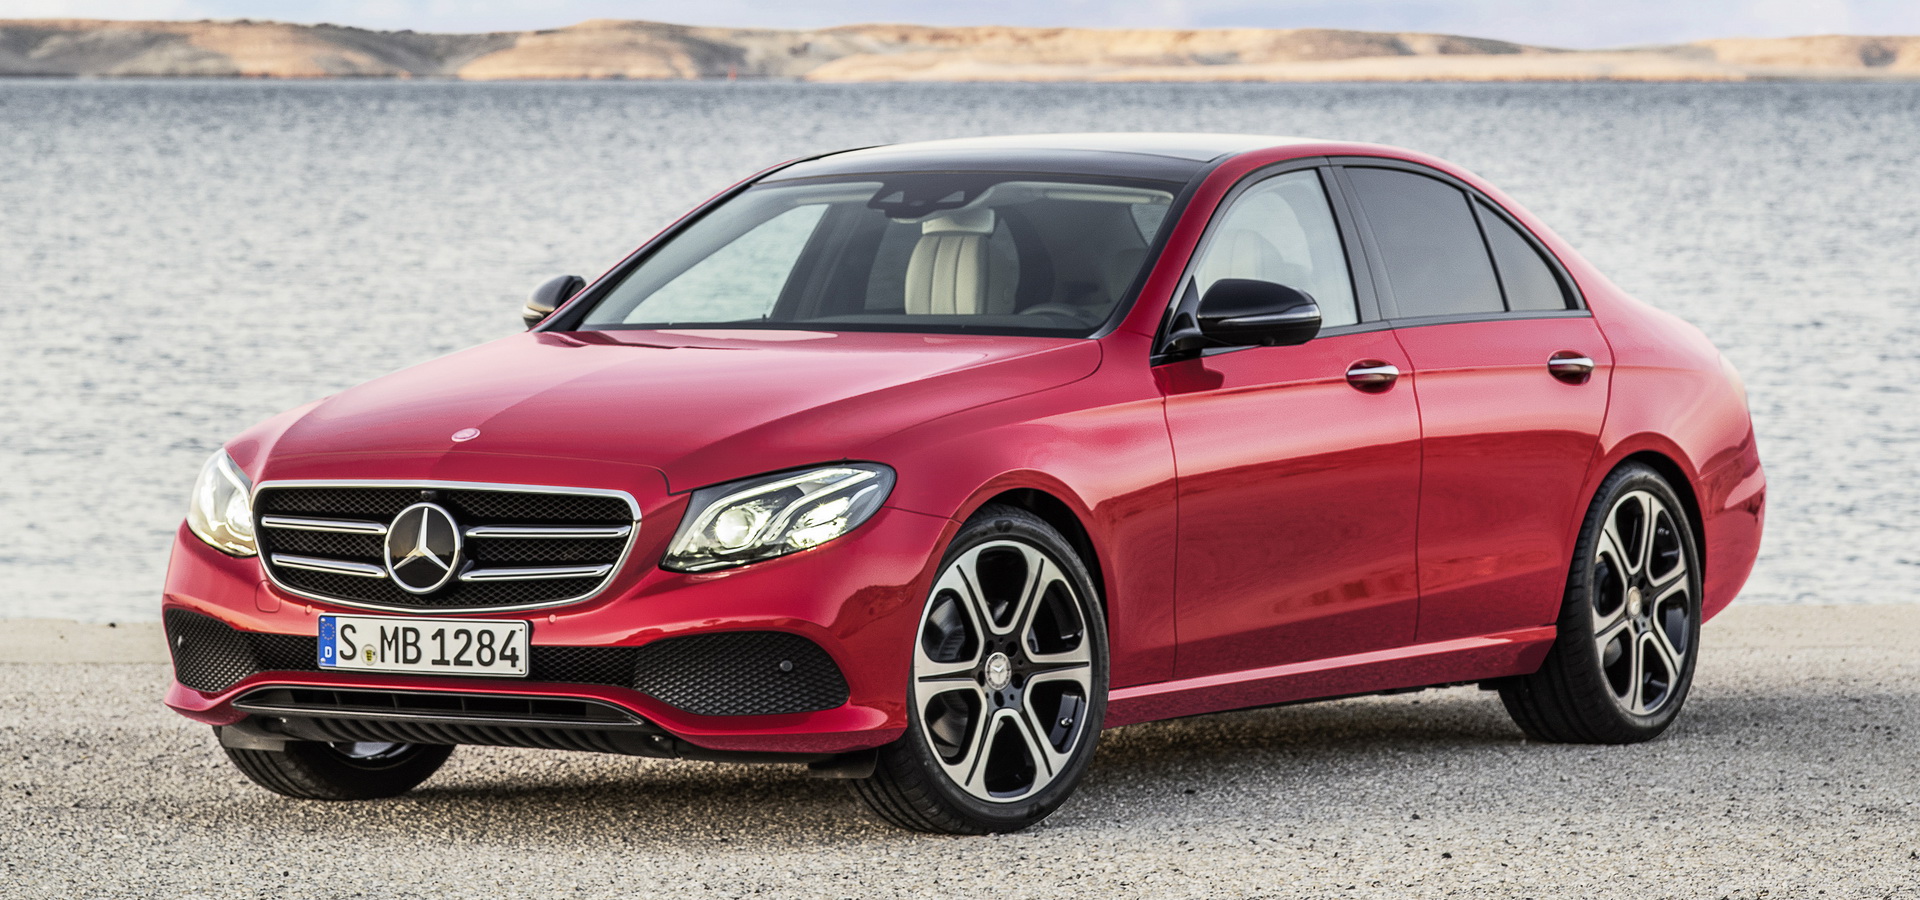 Facelift Or No Facelift What S Your Verdict On The 21 Mercedes Benz E Class Carscoops